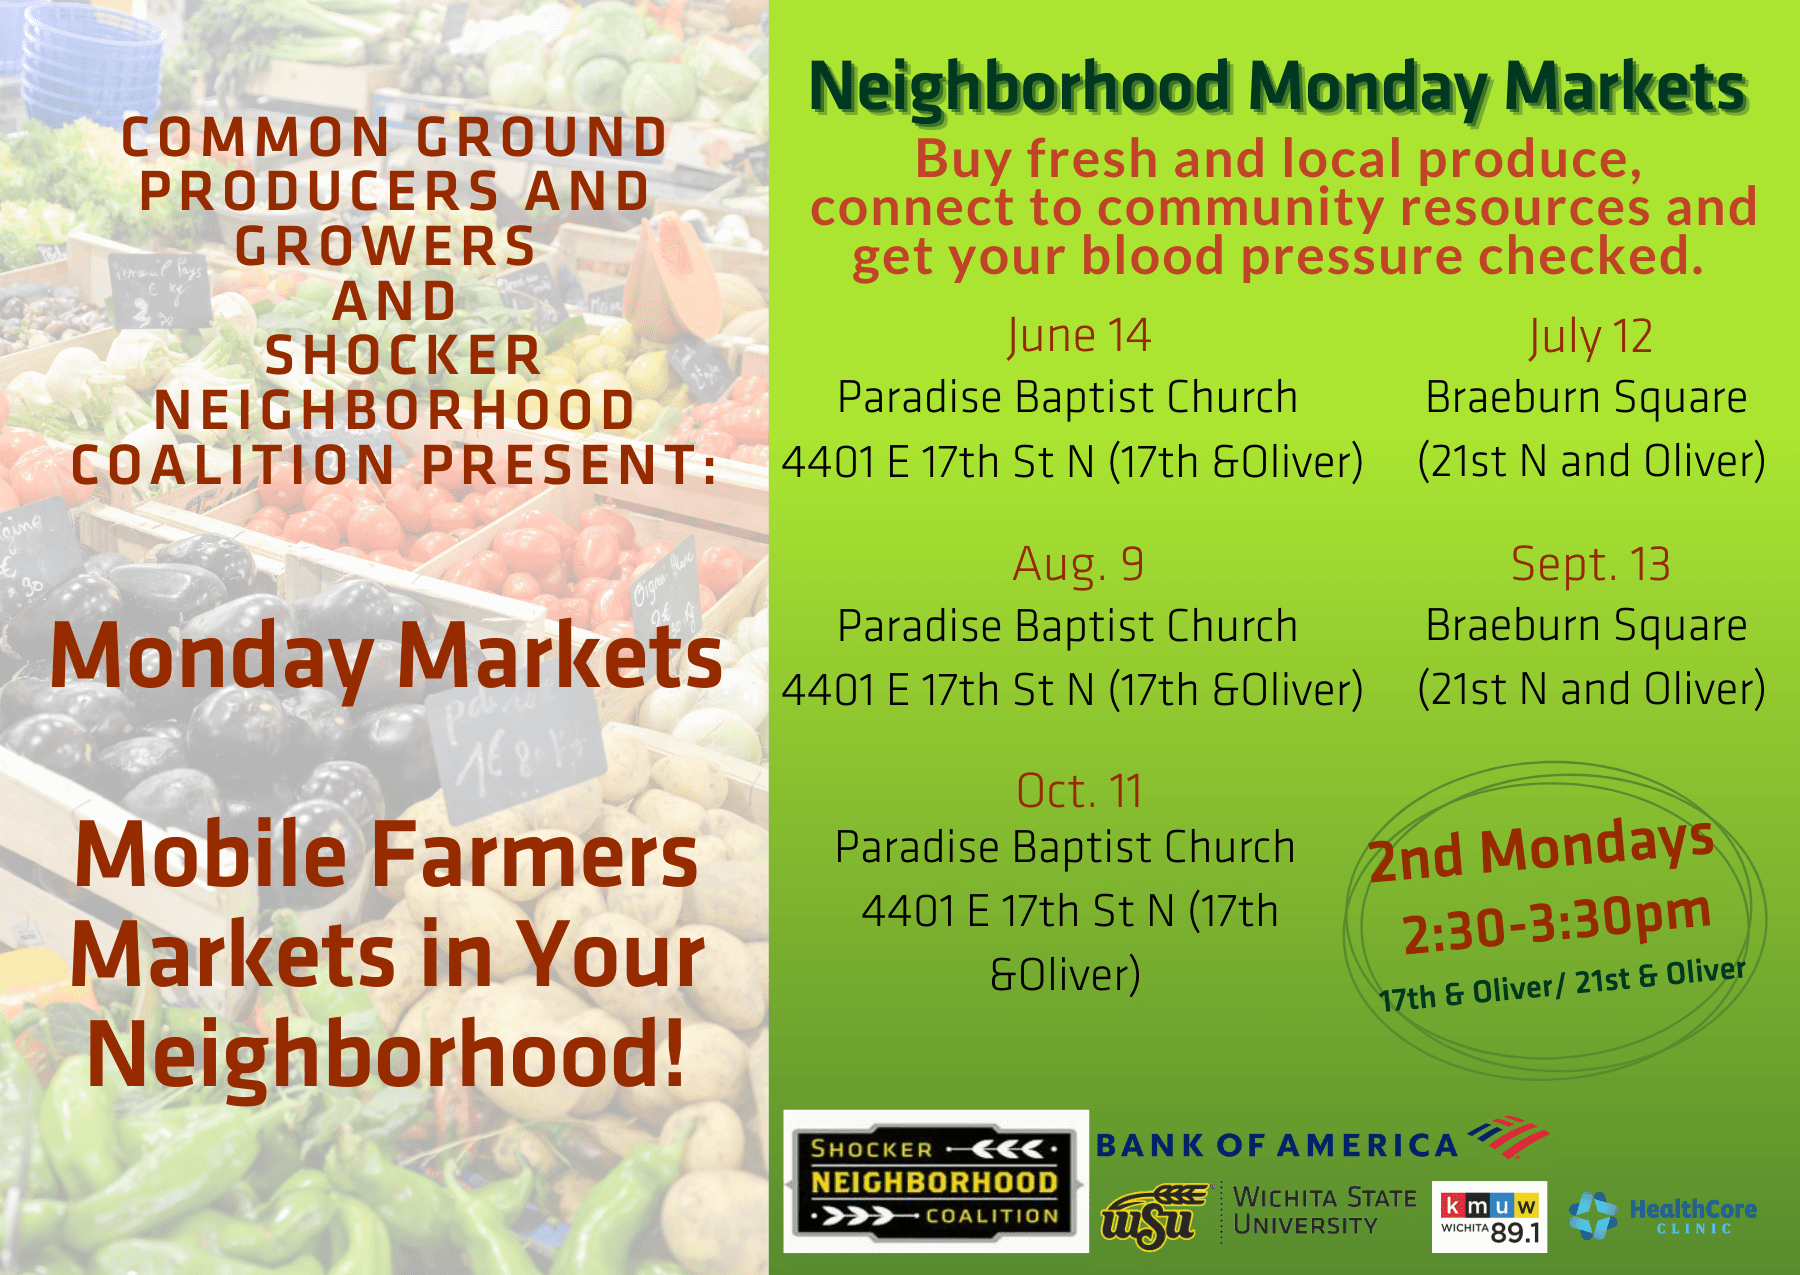 Common Ground Producers and Growers and Shocker NeighborHood Coalition Present:Monday Markets Mobile Farmers Markets in Your Neighborhood! Neighborhood Monday Markets Buy fresh and local produce, connect to community resources and get your blood pressure checked. June 14, Paradise Baptist Church 4401 E 17th St N (17th &Oliver), July 12 Braeburn Square (21st N and Oliver), Aug. 9 Paradise Baptist Church 4401 E 17th St N (17th &Oliver), Sept. 13 Braeburn Square (21st N and Oliver), Oct 11 Paradise Baptist Church 4401 E 17th St N (17th &Oliver). 2nd Mondays 2:30-3:30 pm 17th & Oliver/ 21st & Oliver. Logos